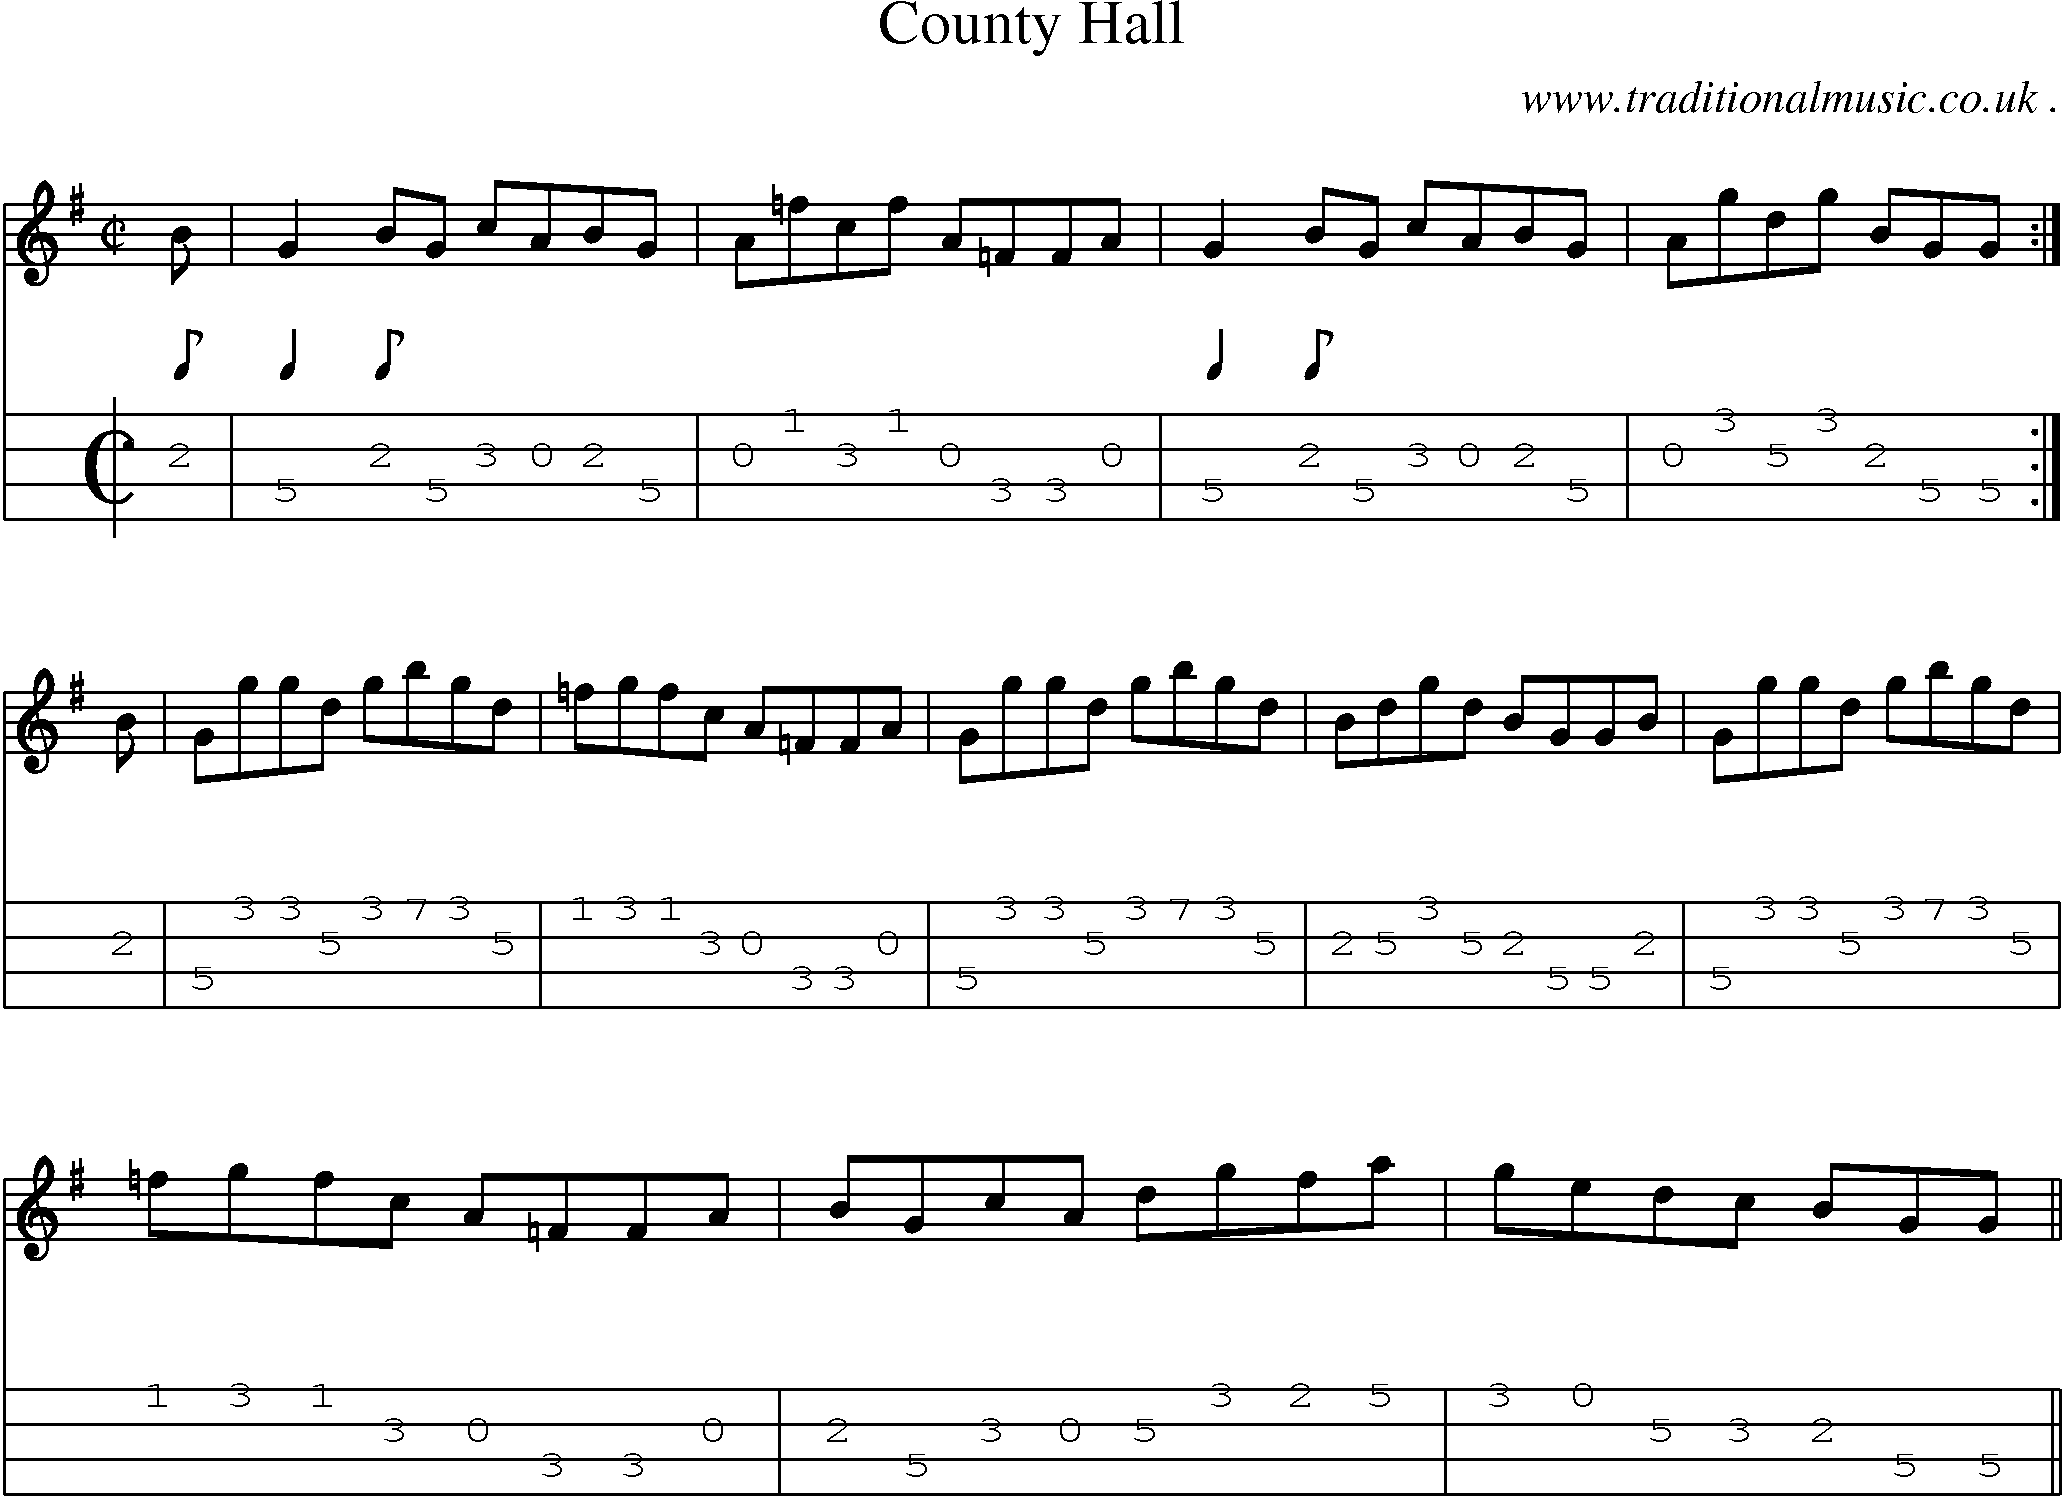 Sheet-music  score, Chords and Mandolin Tabs for County Hall